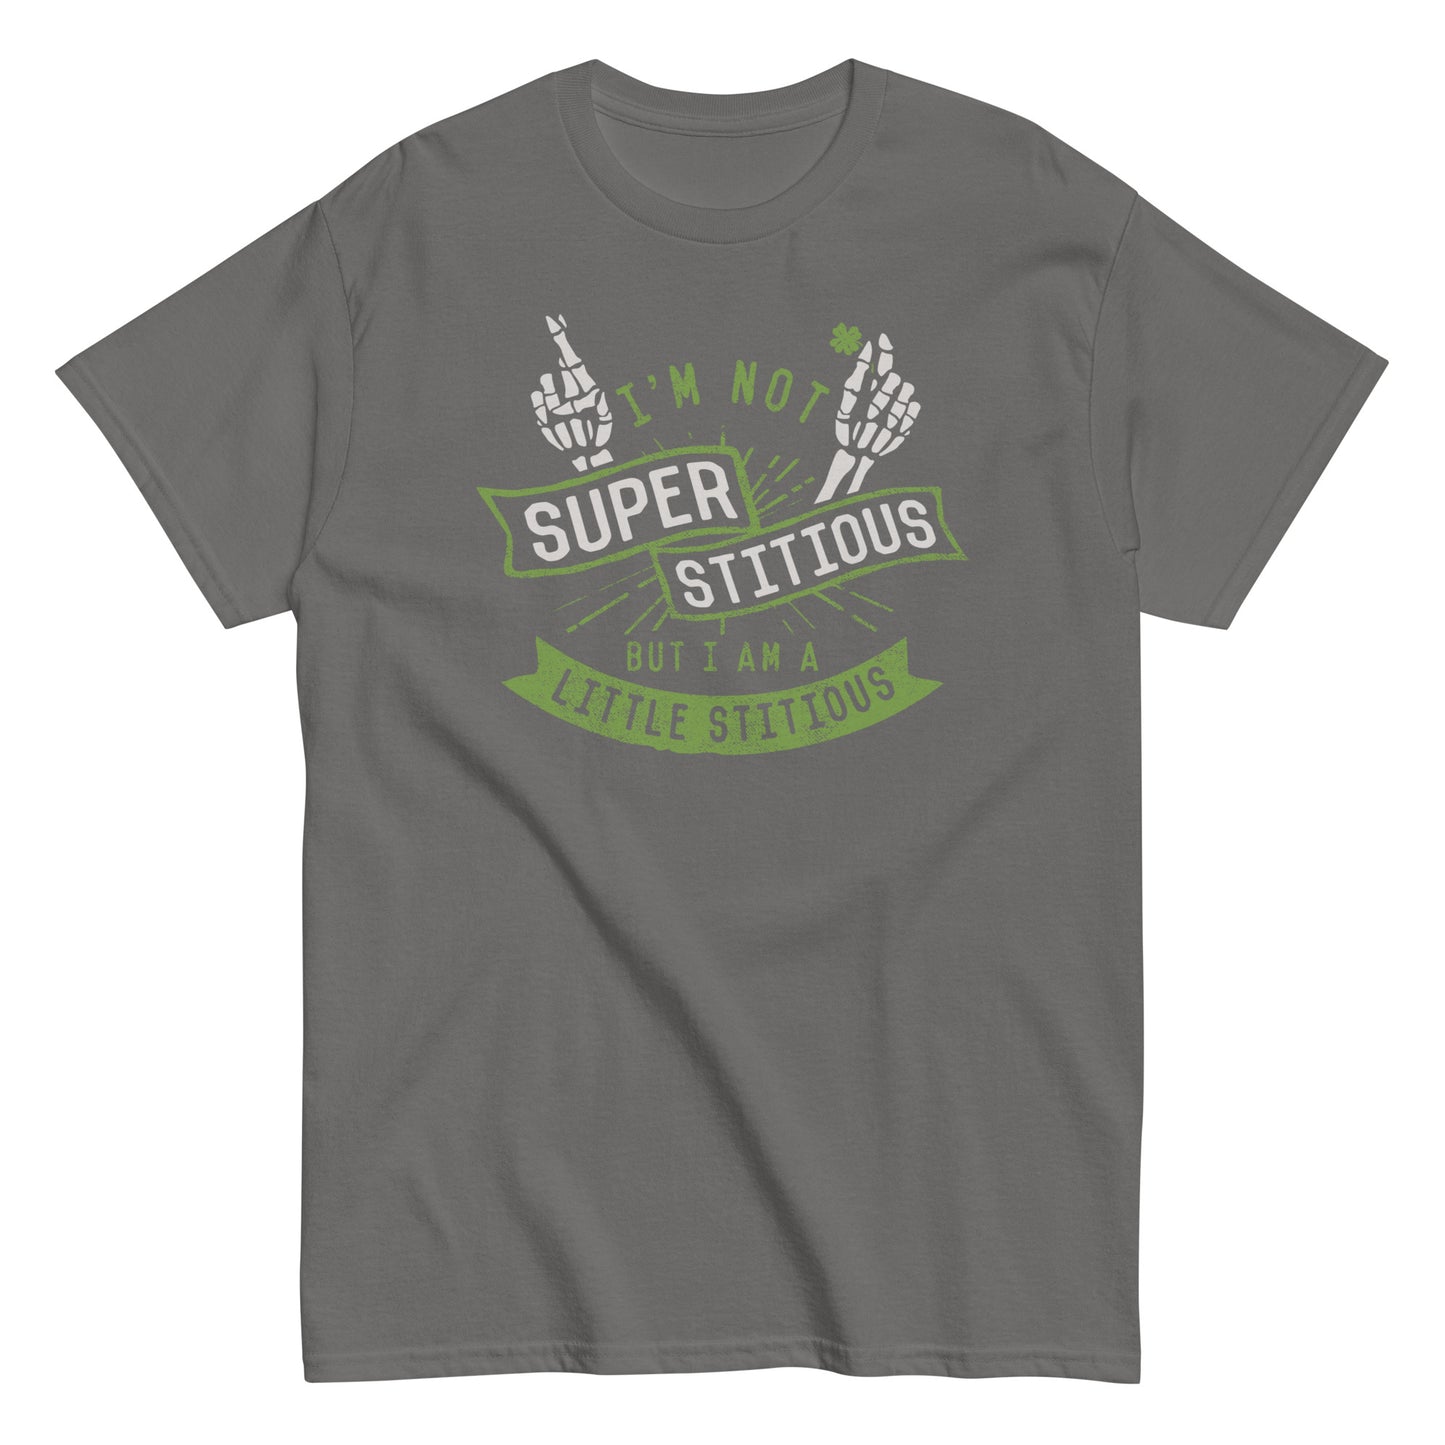 I'm Not Superstitious, But I Am A Little Stitious Men's Classic Tee